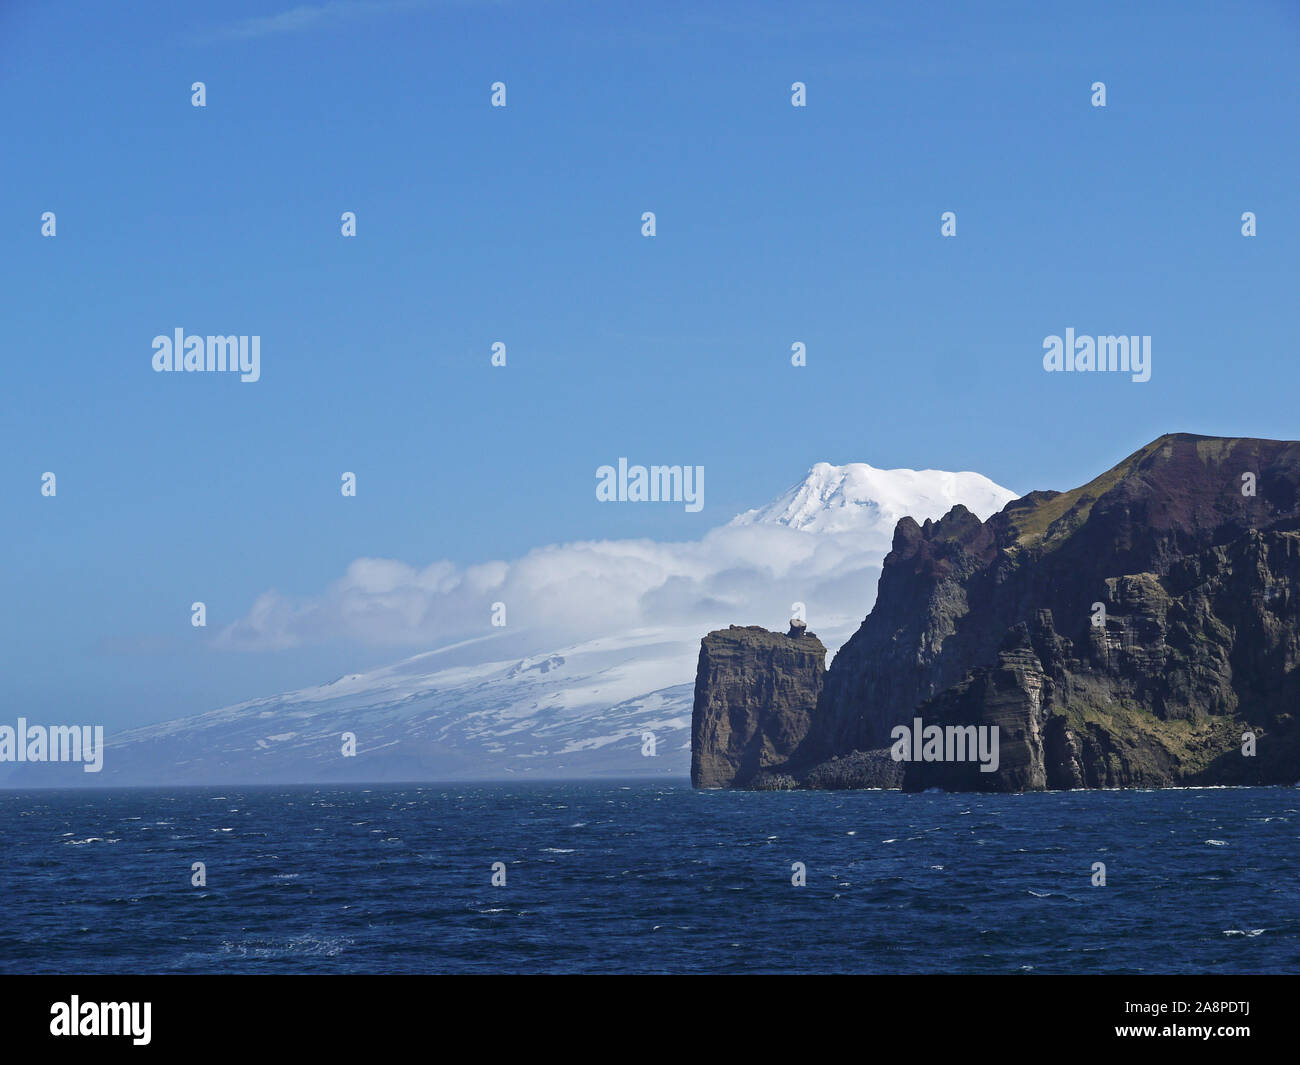 Jan Mayen Island a Norwegian volcanic island in the Arctic Ocean.  The island is dominated by the Beerenberg mountain and a Norwegian weather station. Stock Photo